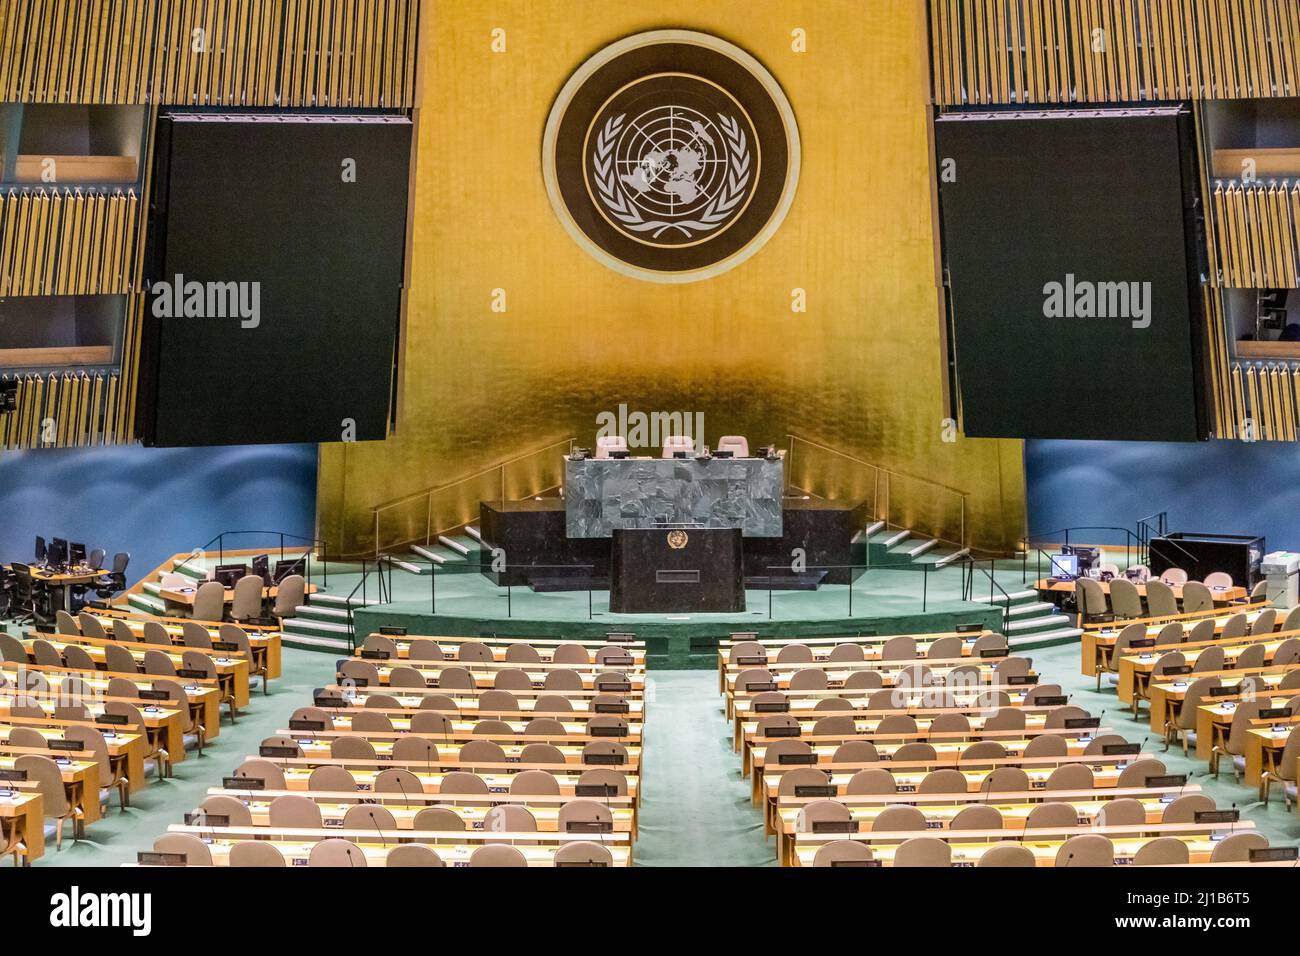 GENERAL ASSEMBLY HALL OF THE UNITED NATIONS ORGANIZATION HEADQUARTERS IN NEW YORK, PEACE IN THE WORLD, UNO, MIDTOWN MANHATTAN, NEW YORK CITY, NEW YORK, USA Stock Photo